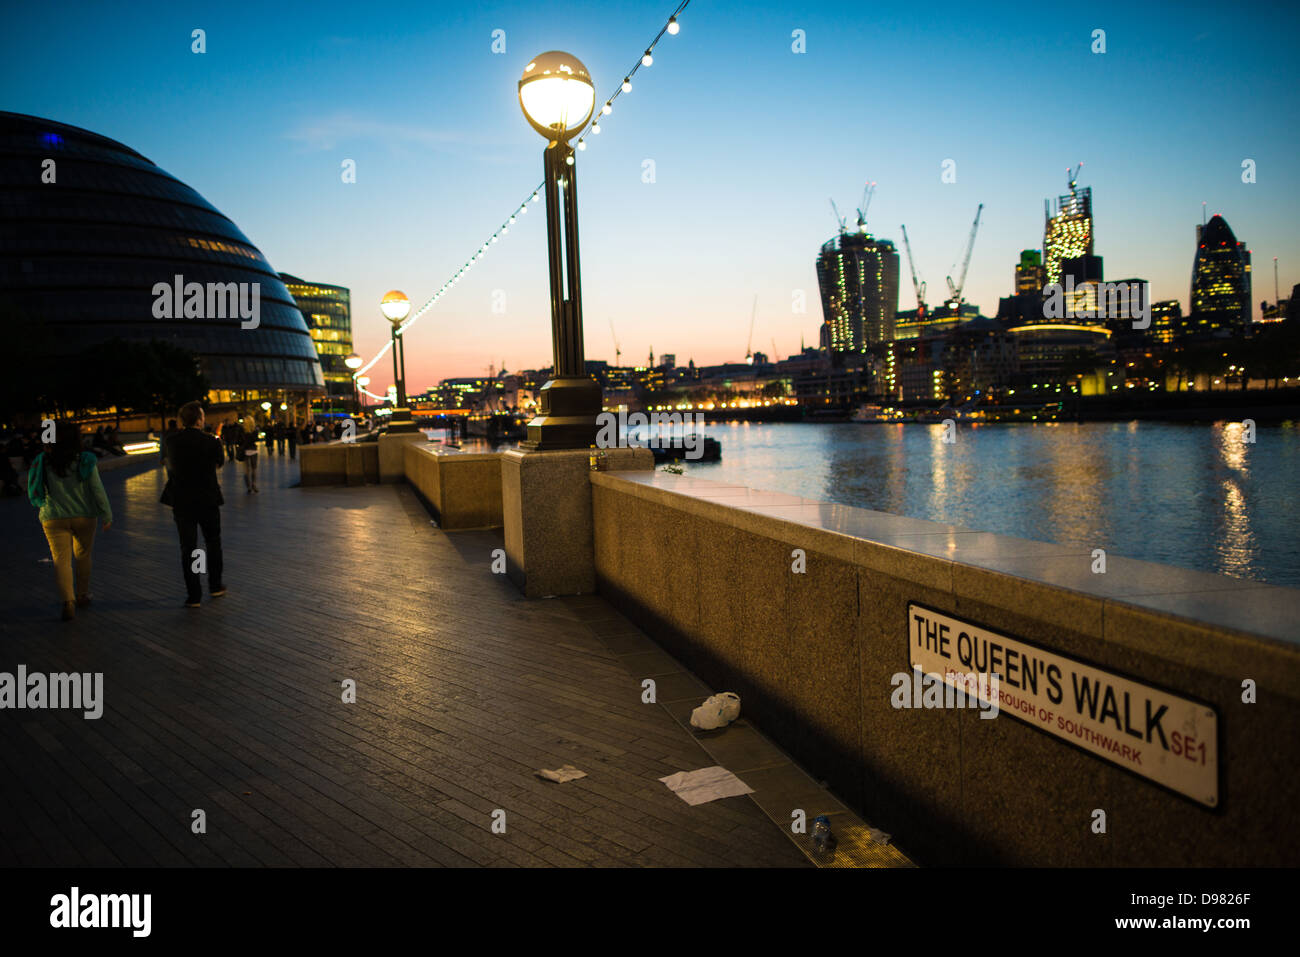 LONDON, UK - The Queens Walk in the London Borough of Southwark, near the Tower Bridge, at dusk, with the city lights of downtown London in the background. Stock Photo